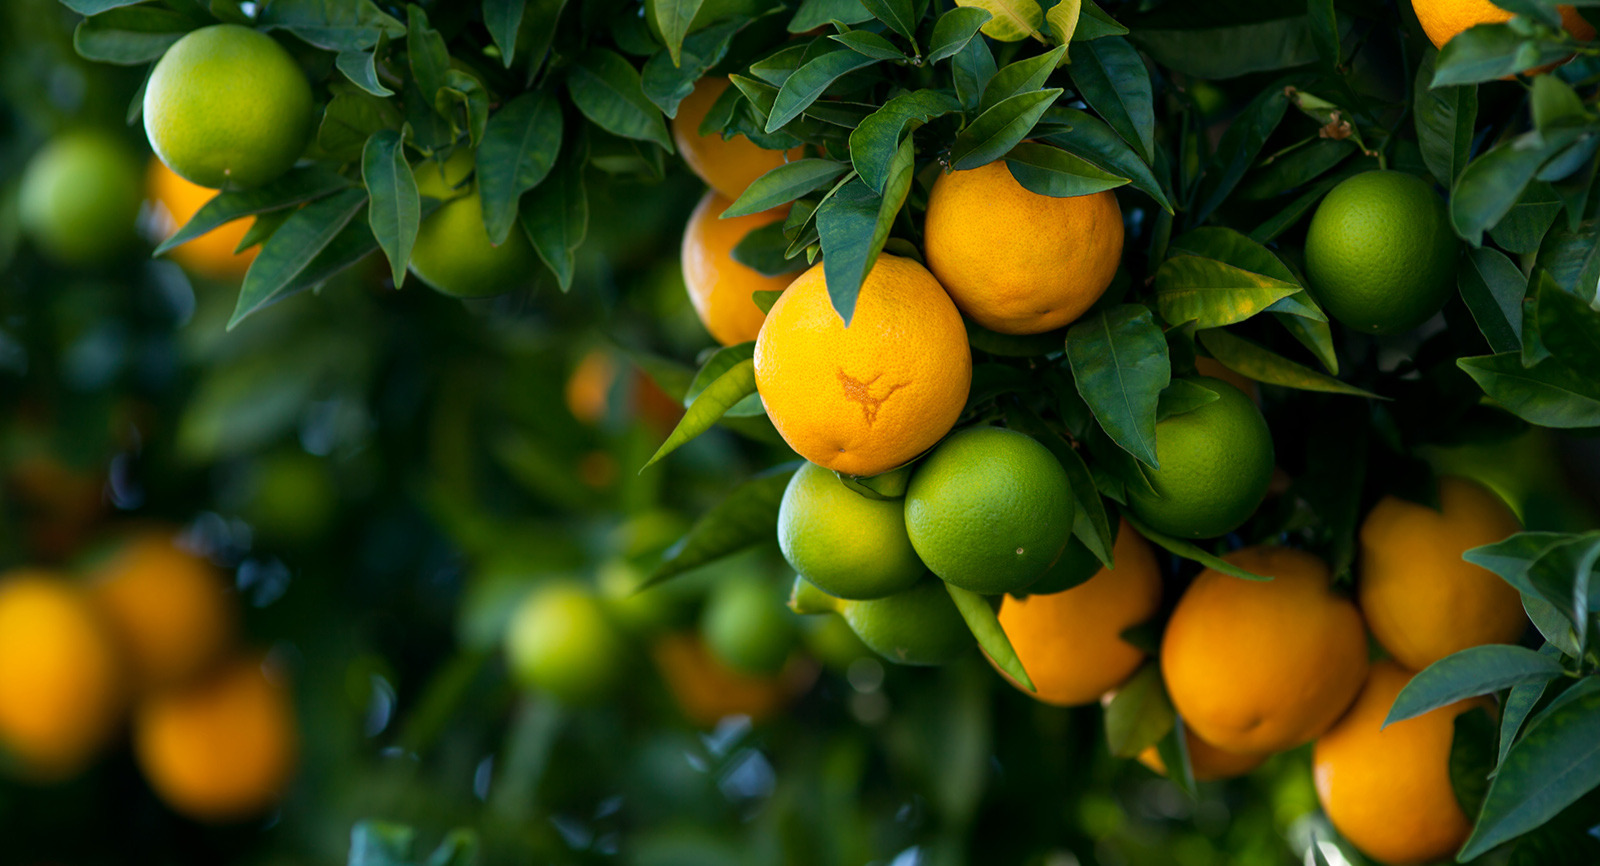 Zimbabwe can now export fruits to China after the two countries signed the citrus phytosanitary protocol